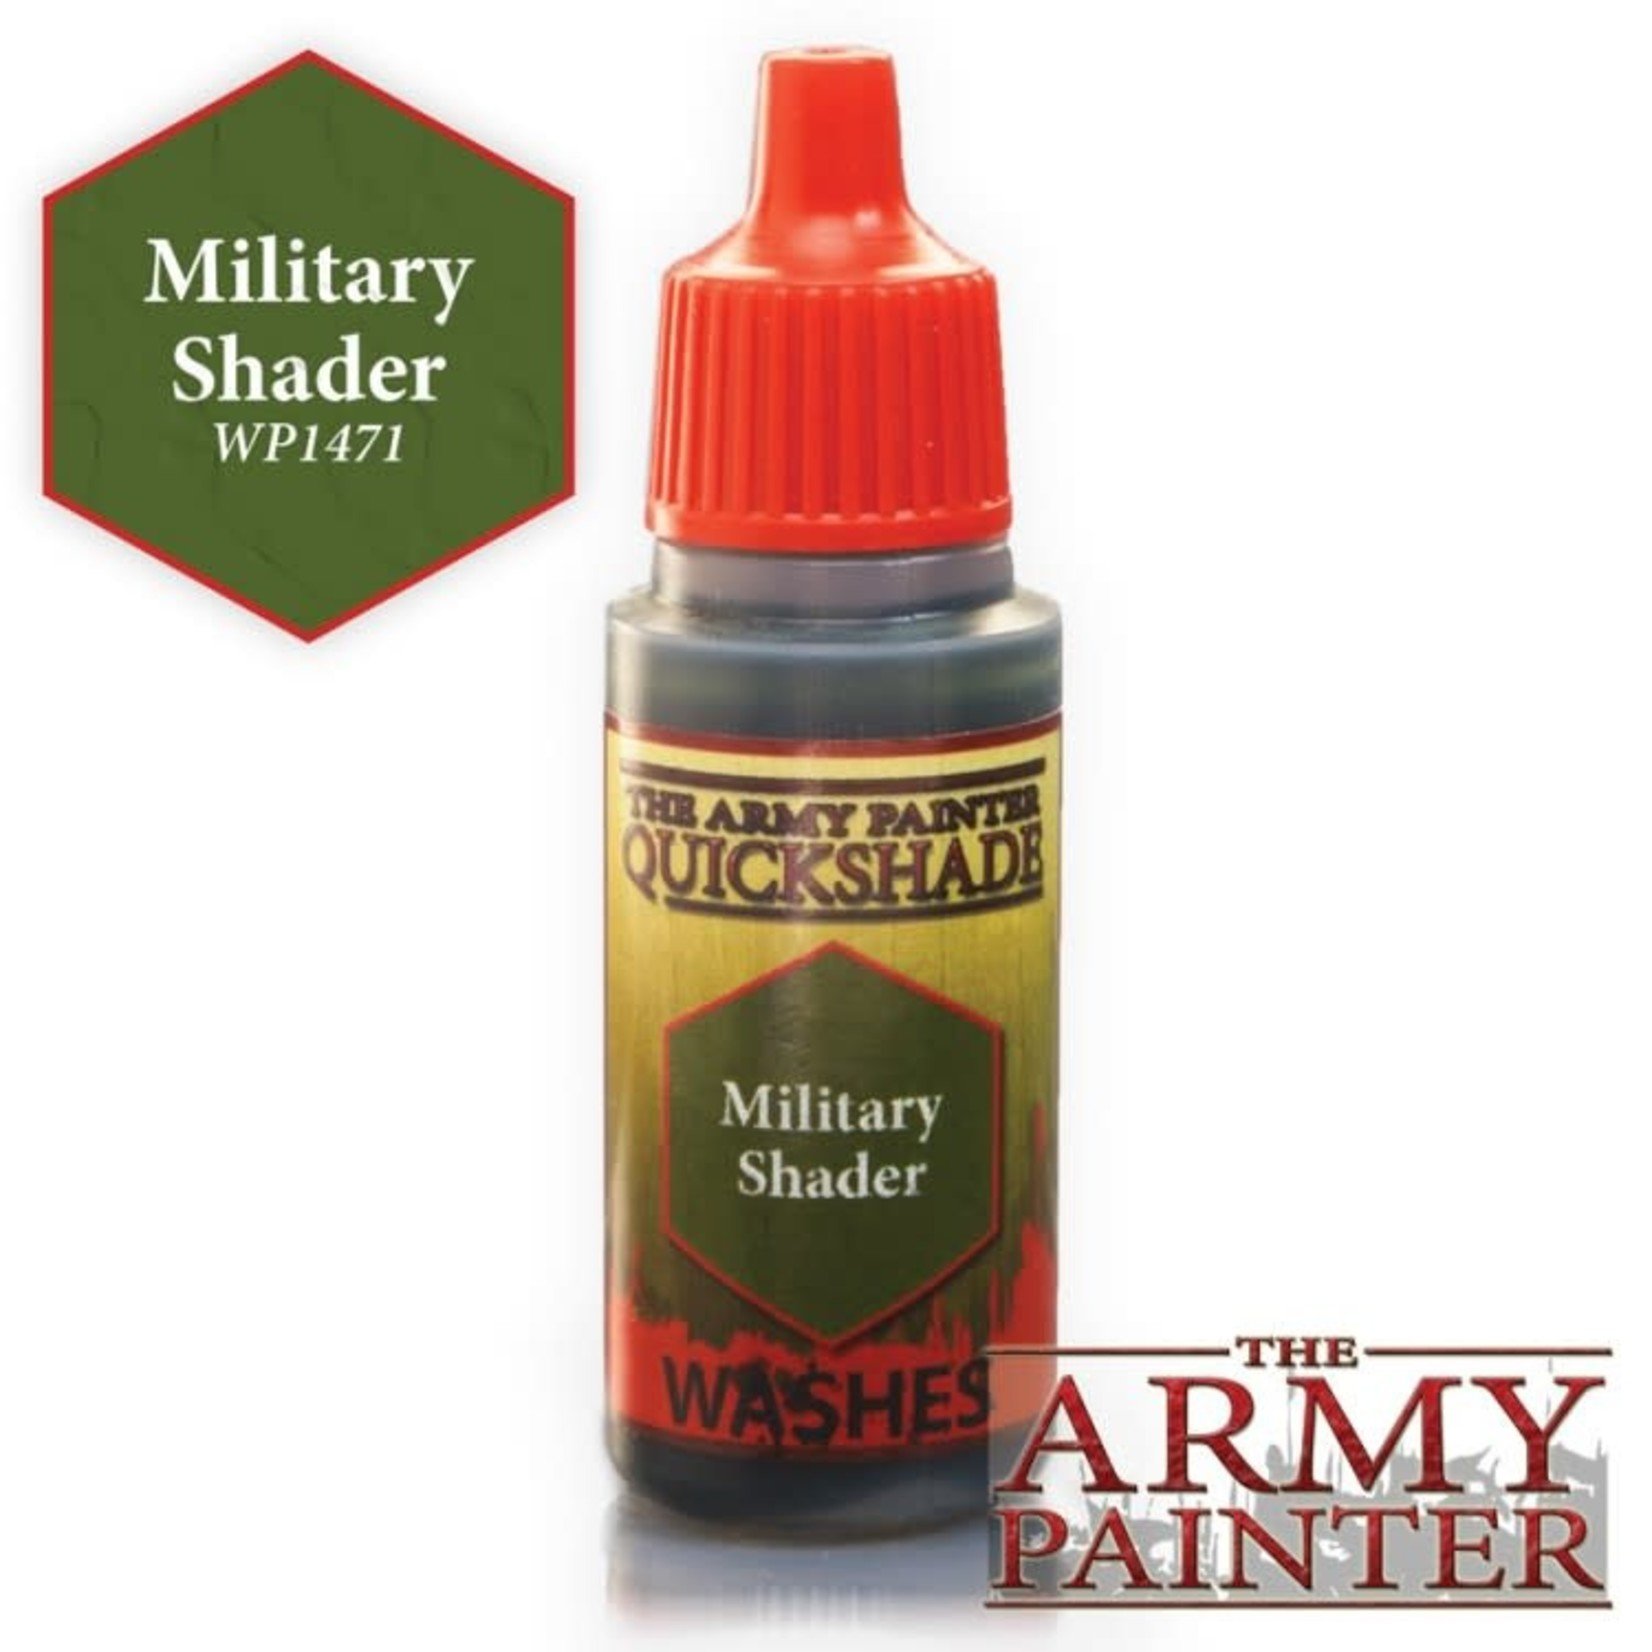 Army Painter Army Painter Warpaints Quickshade Washes Military Shader